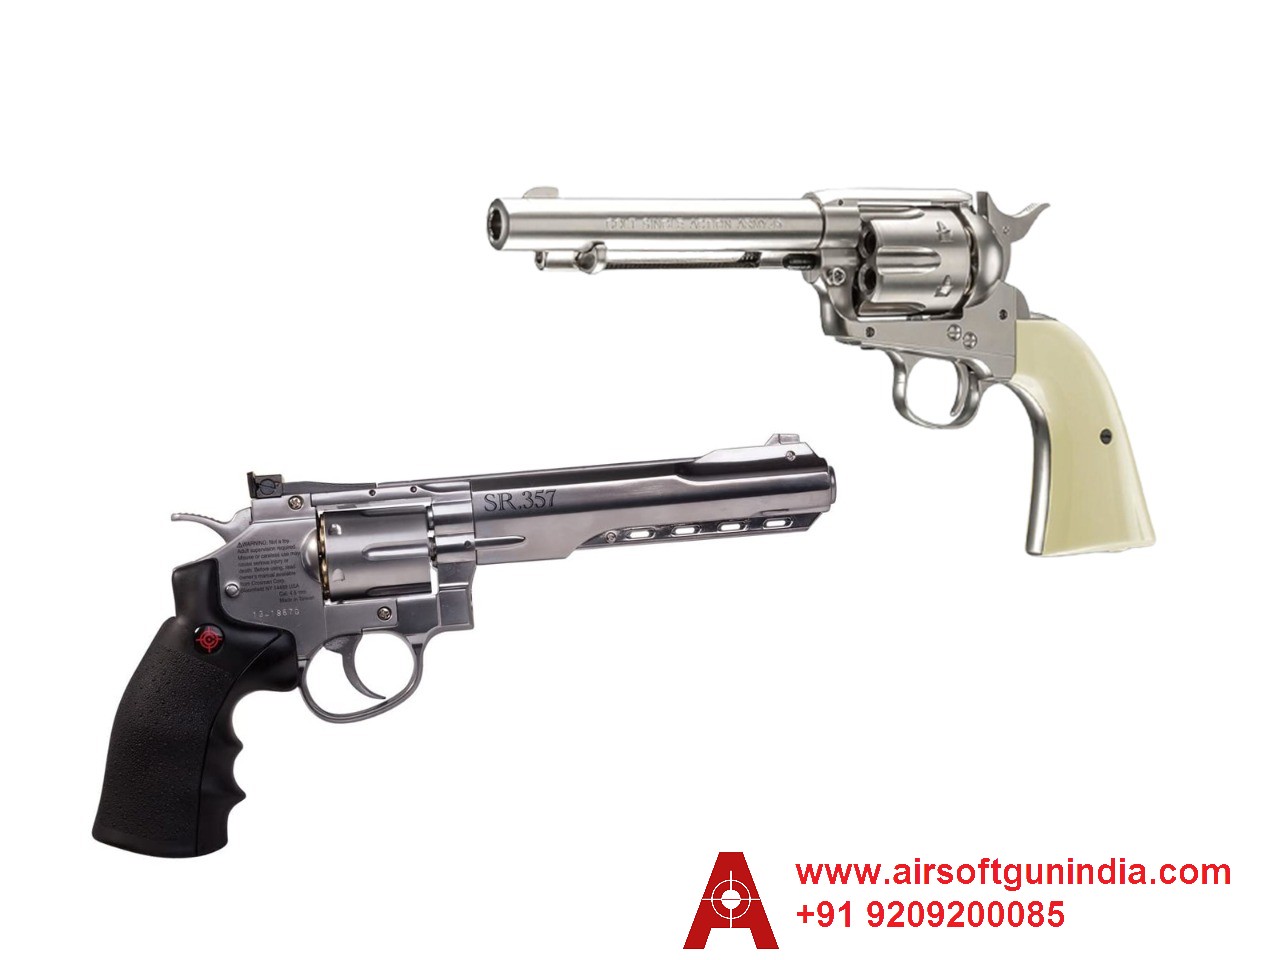 Imported Co2 Revolver In India